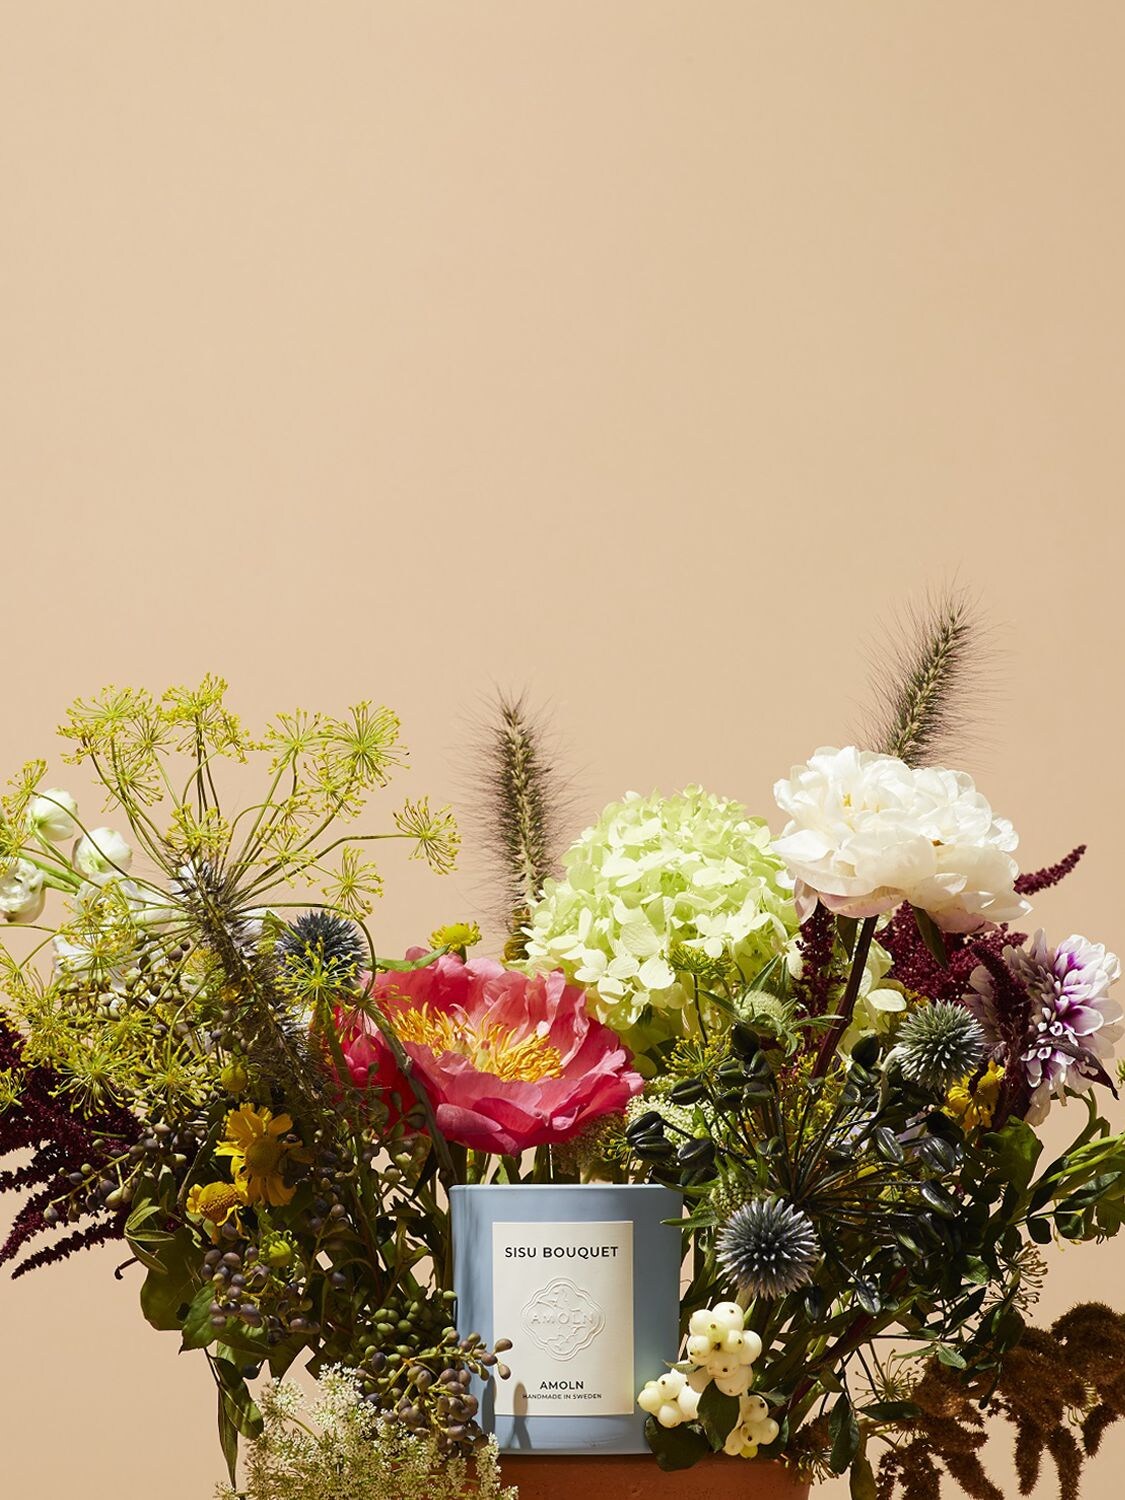 Shop Amoln Sisu Bouquet Scented Candle In Blue